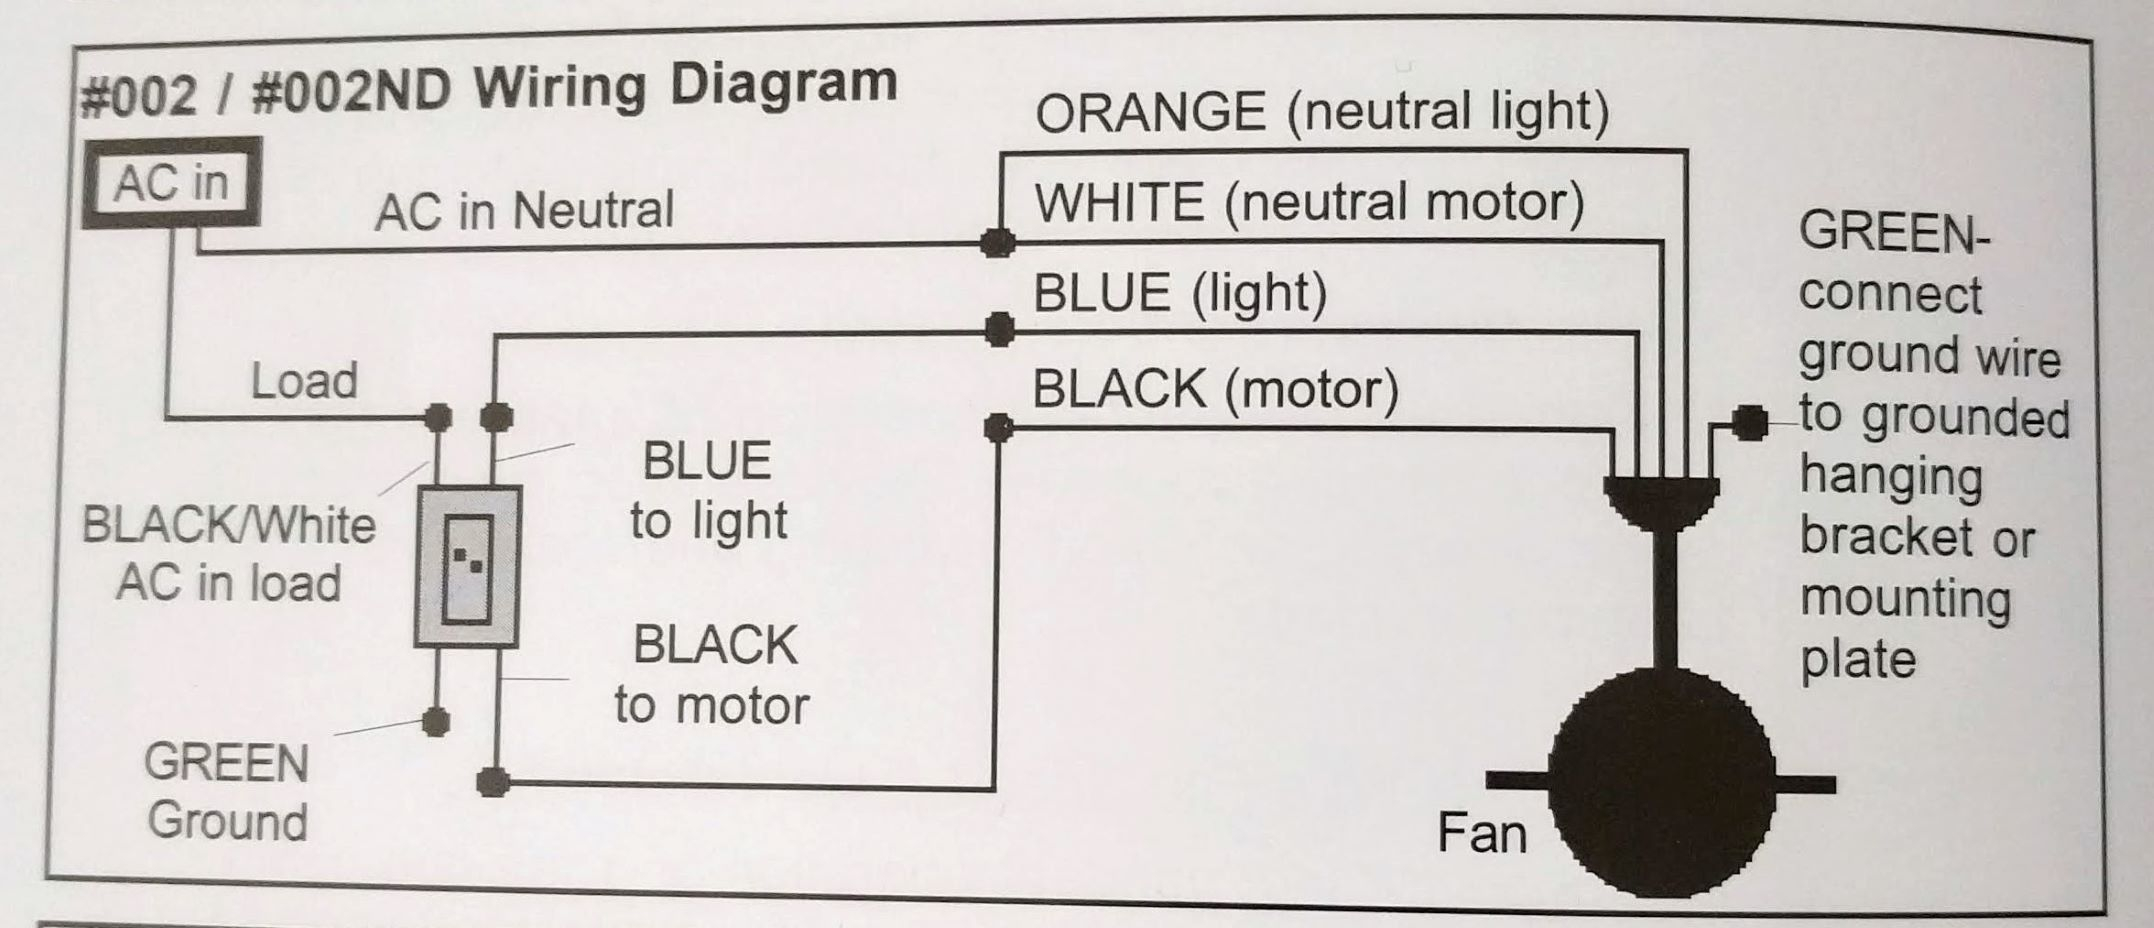 Wiring A Ceiling Fan With Black White Red Green In intended for dimensions 2154 X 928